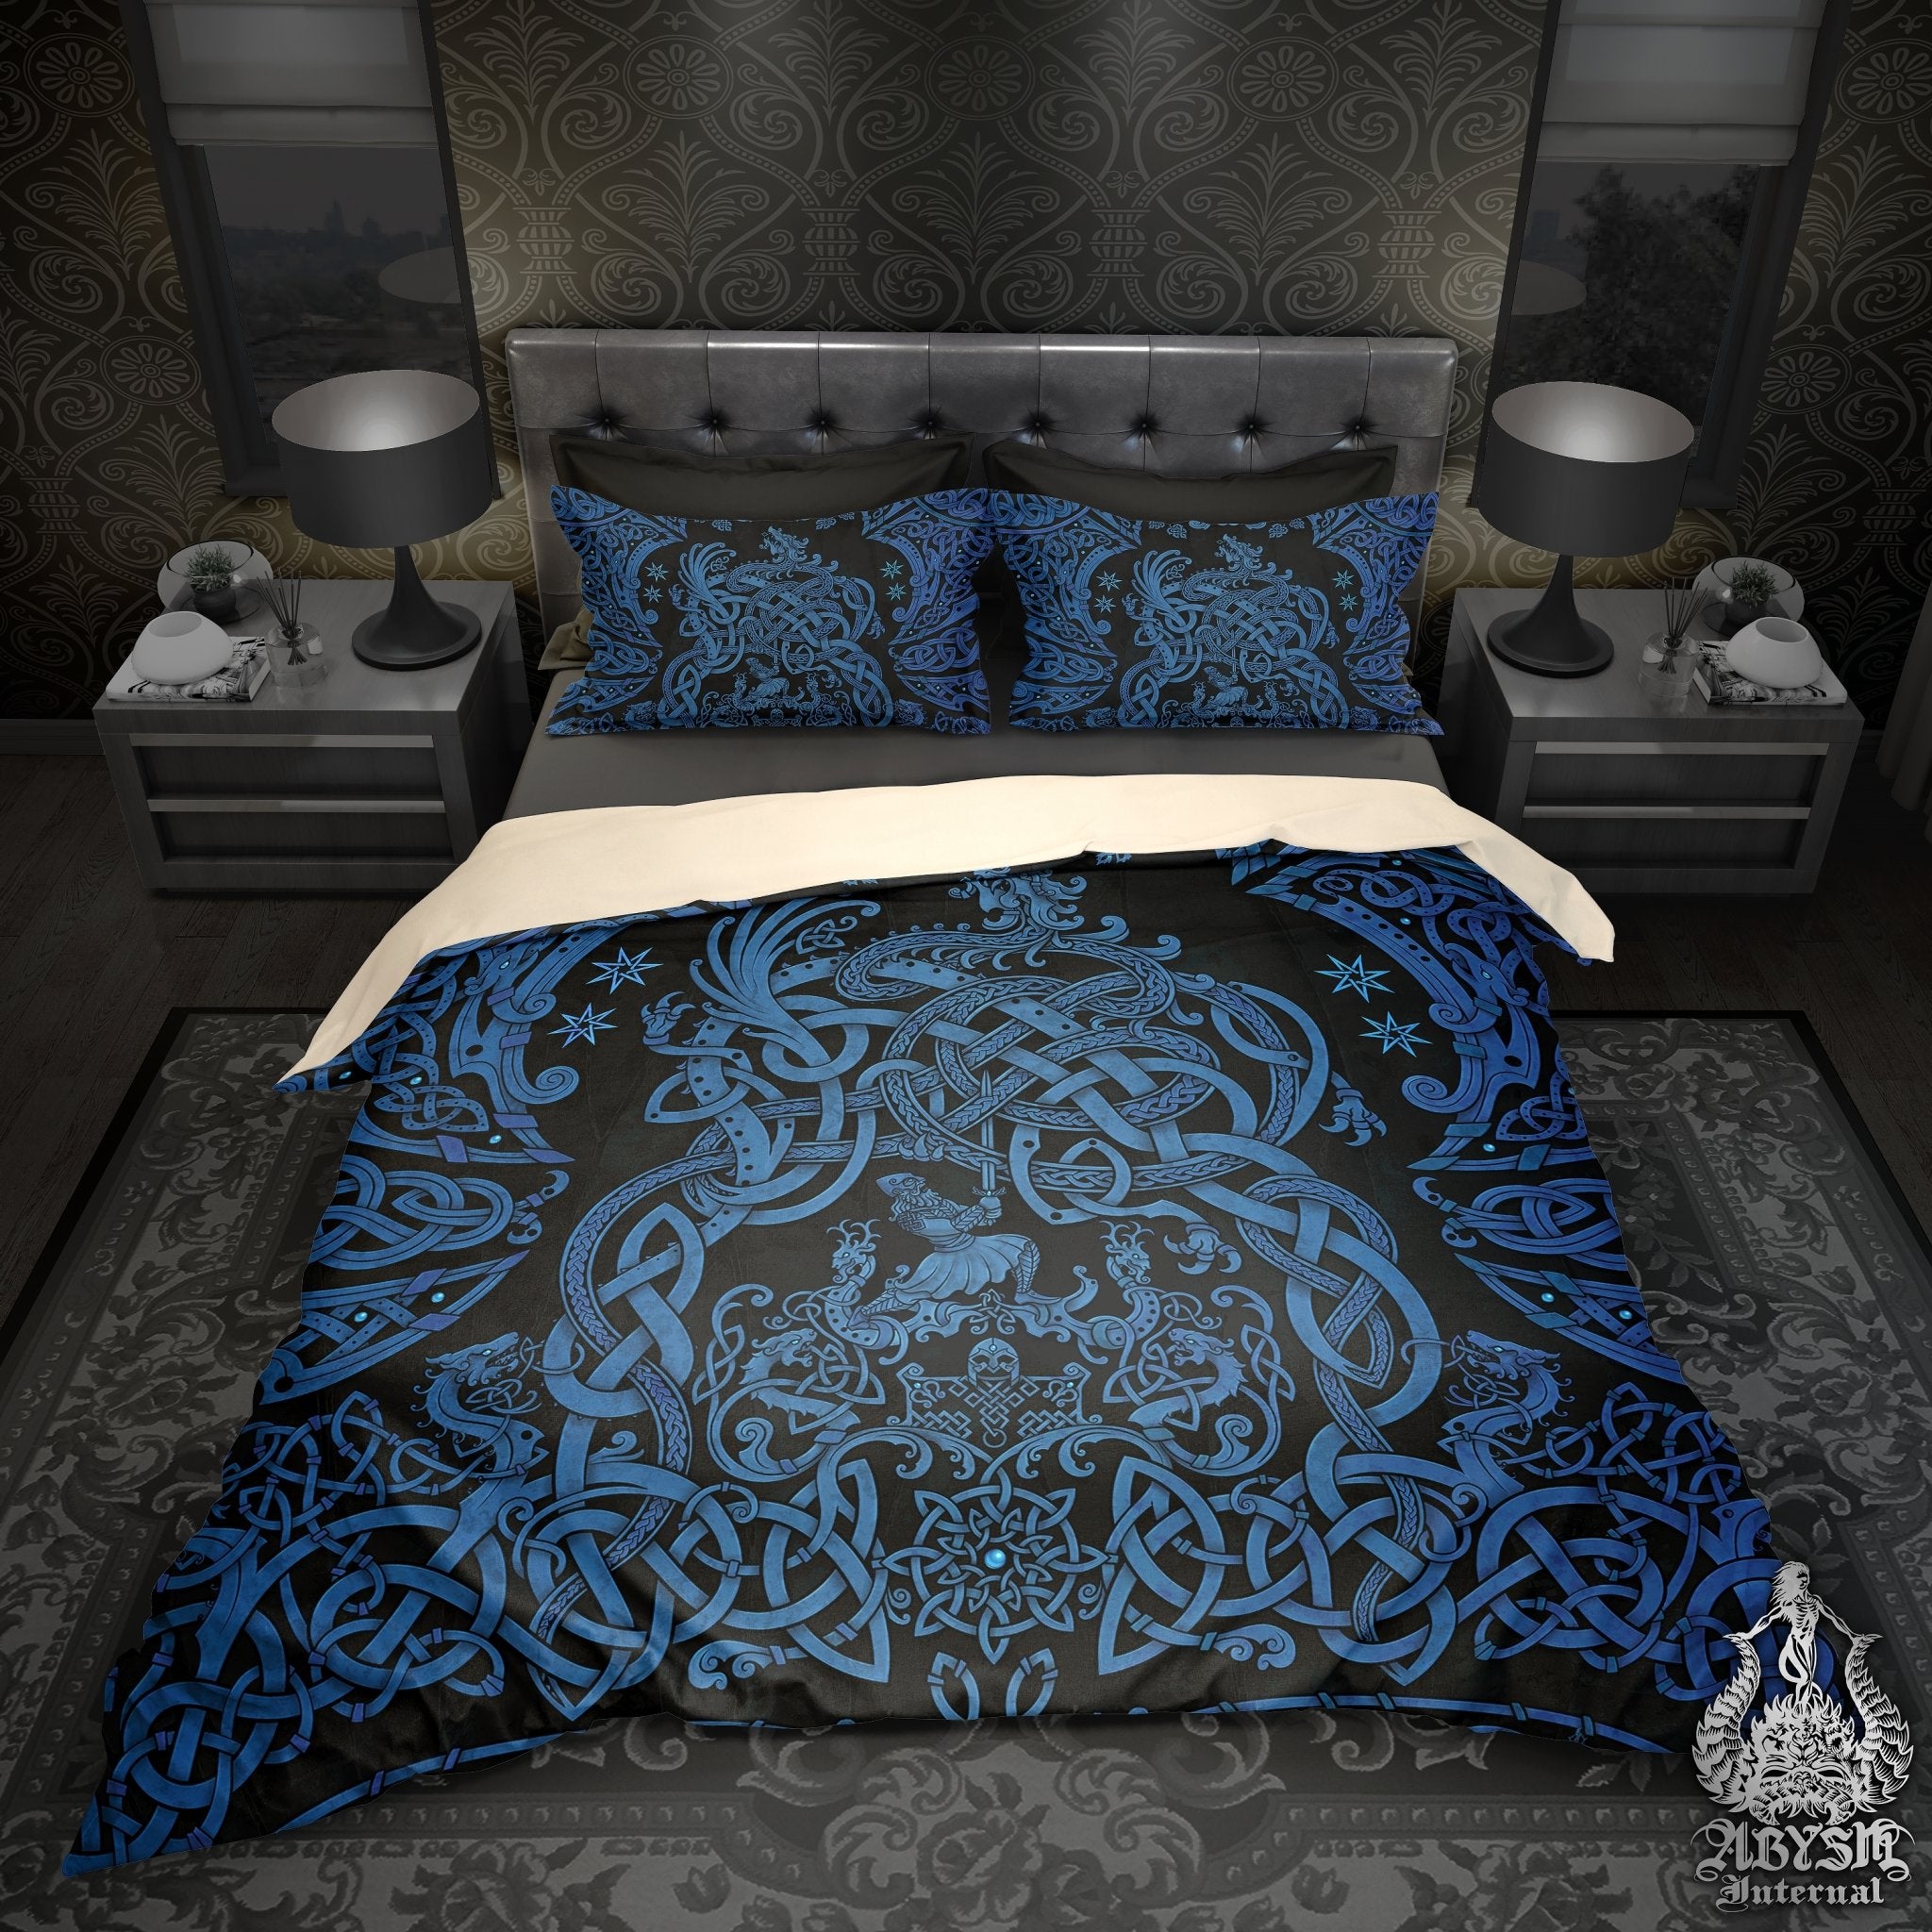 Viking Bedding Set, Comforter and Duvet, Norse Bed Cover and Bedroom Decor, Nordic Art, Sigurd kills Dragon Fafnir, King, Queen and Twin Size - Black & Blue - Abysm Internal